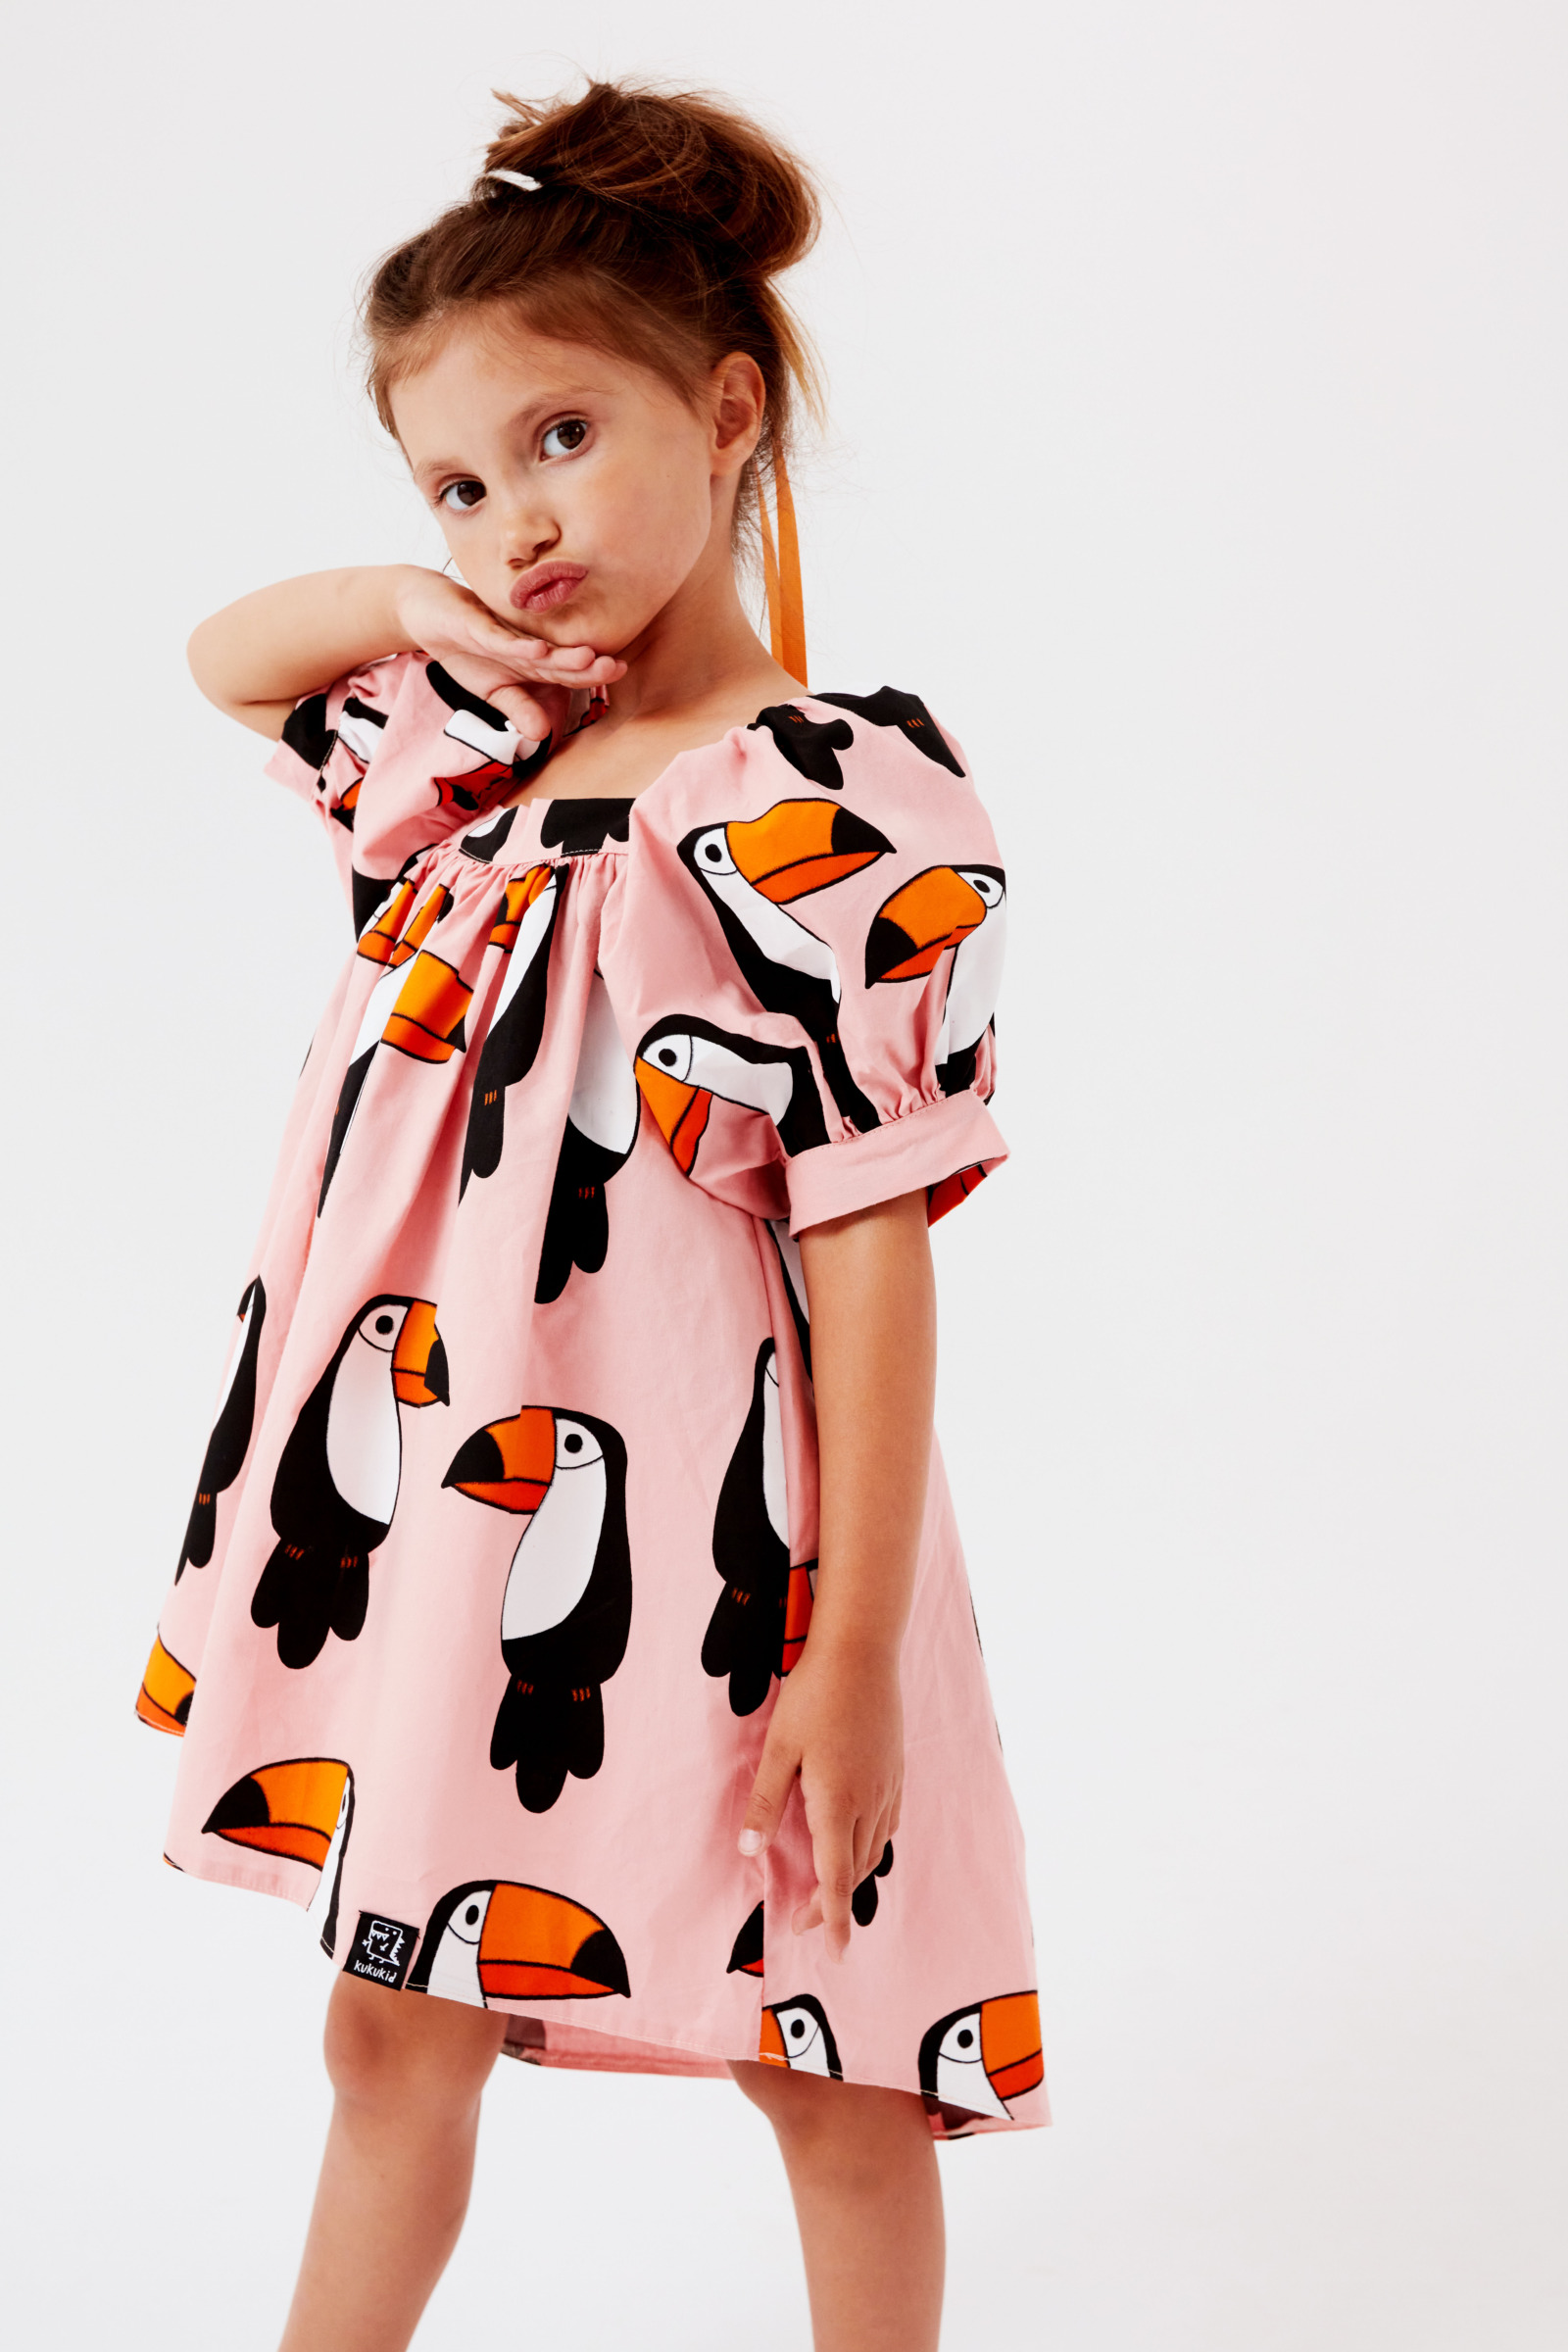 New Puffed Dress - Pale Pink Tucan • I Made You